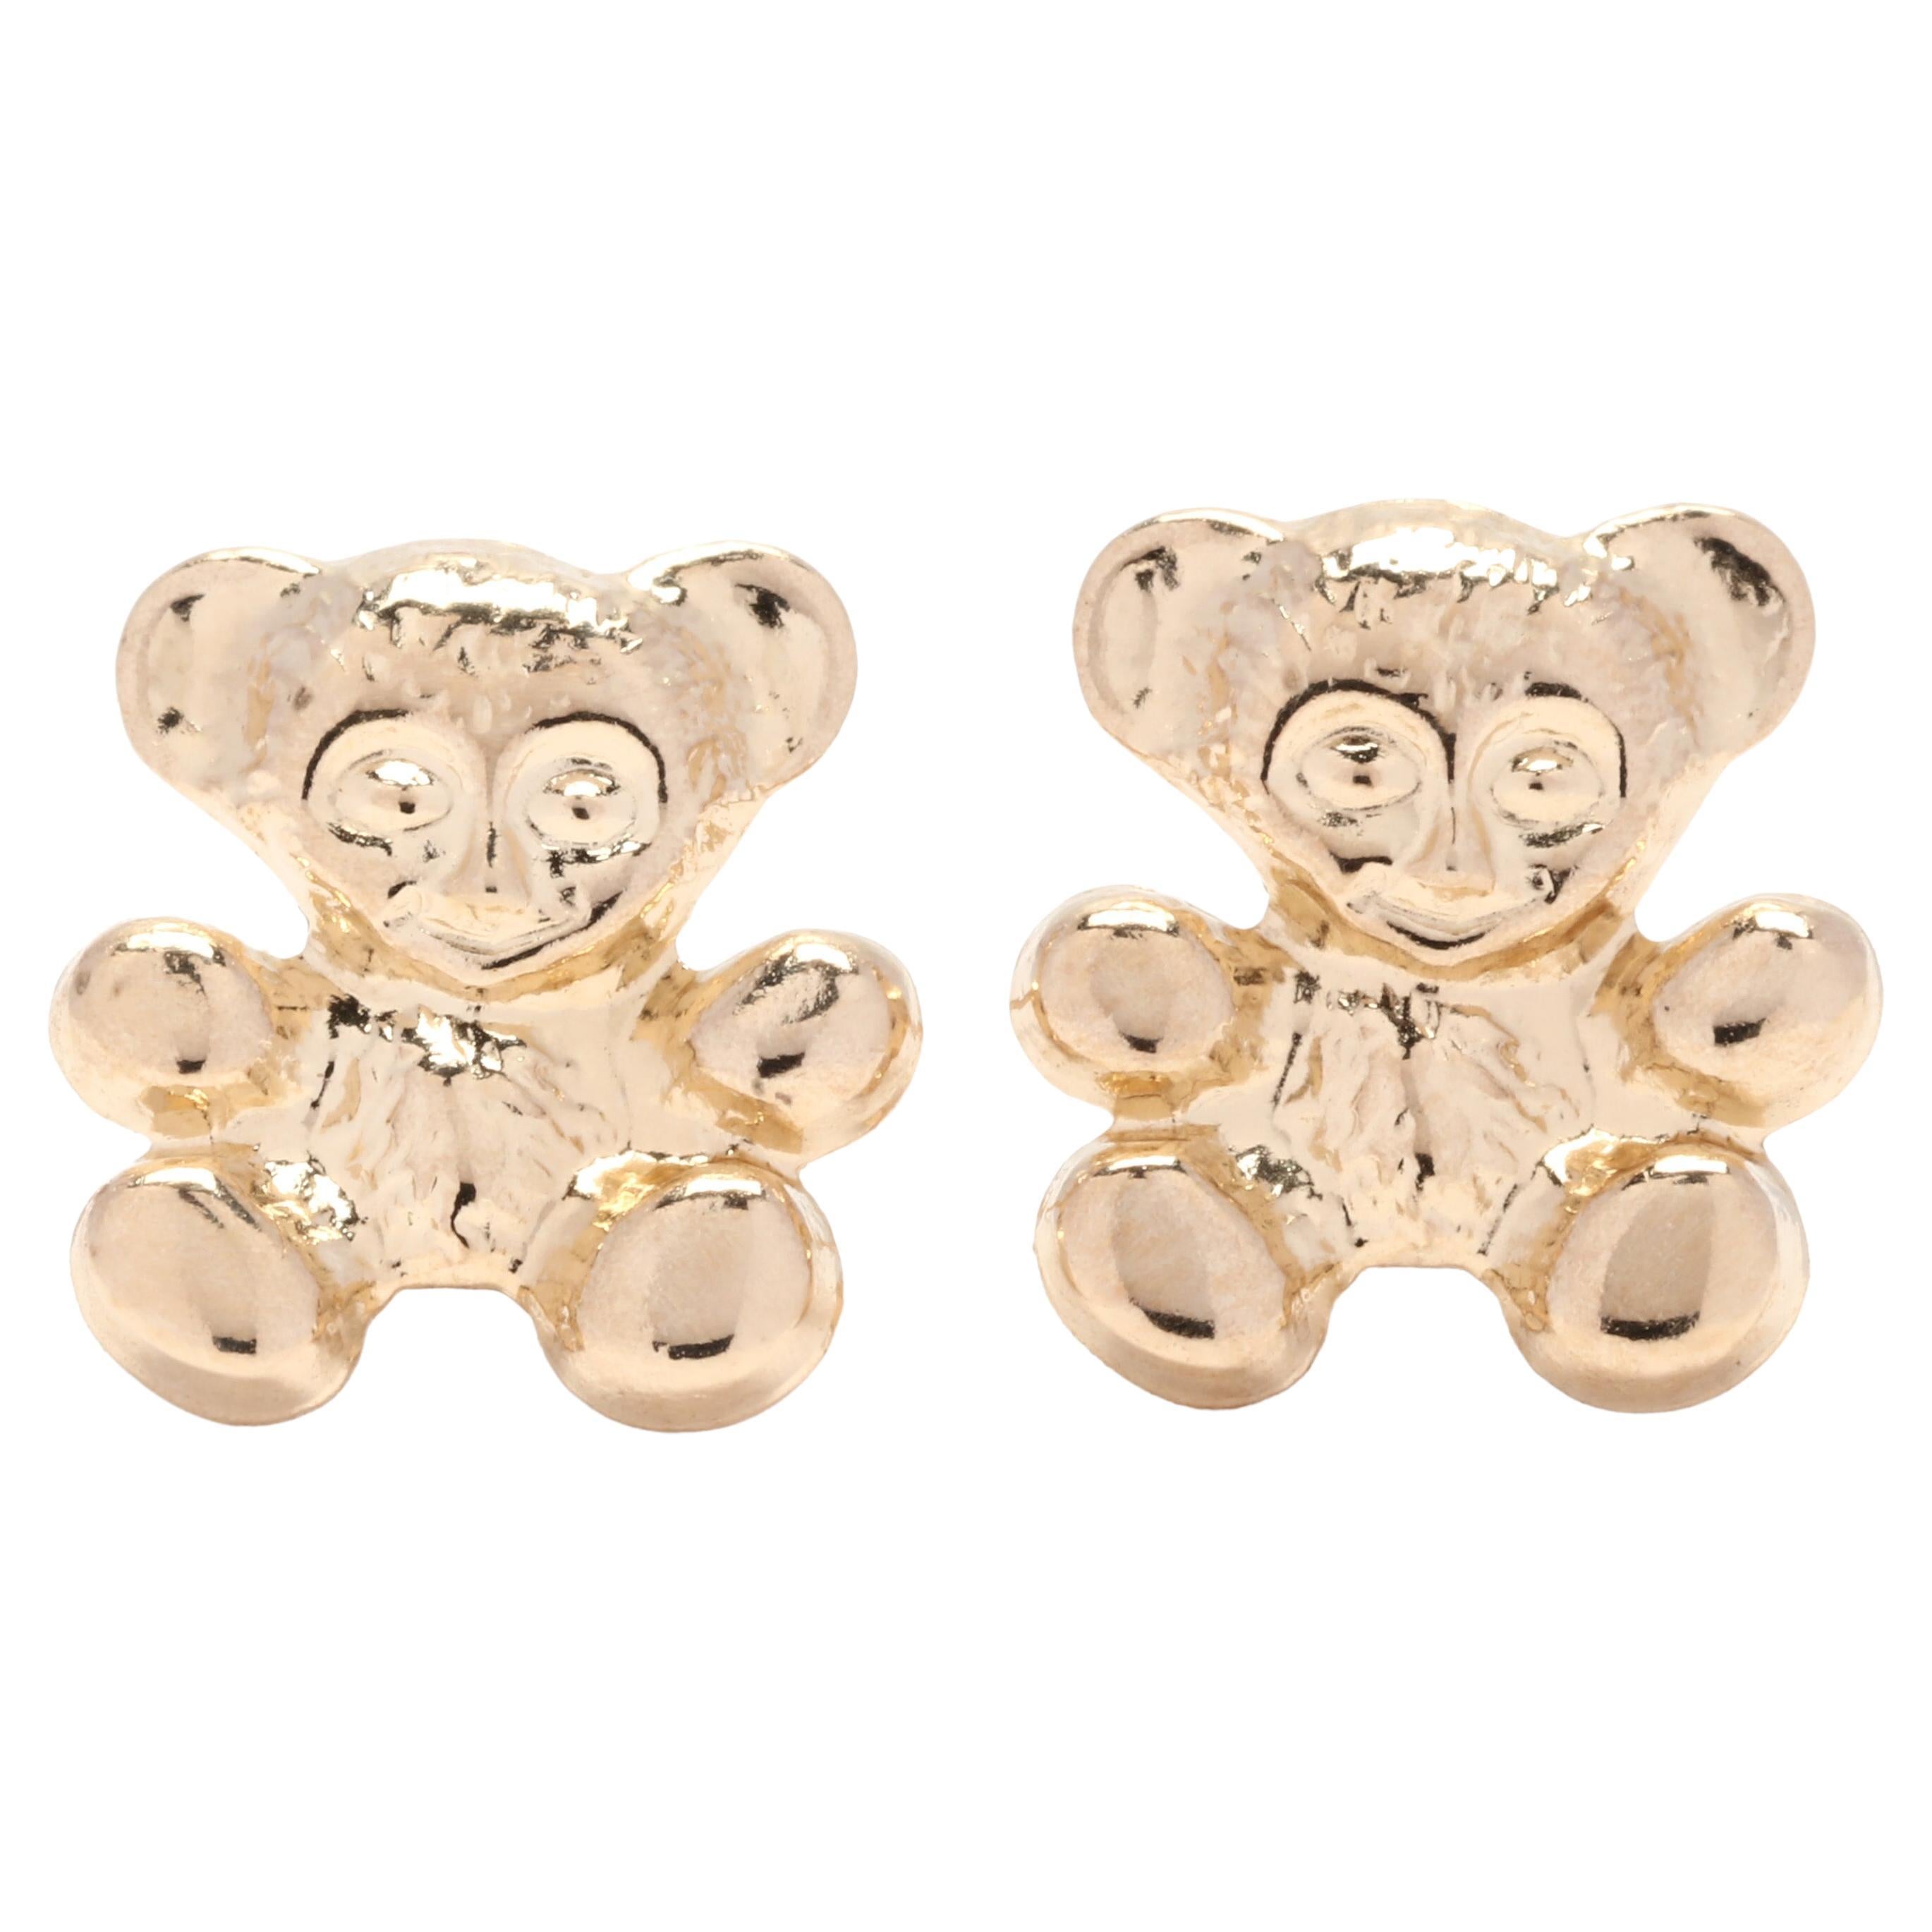 Small Teddy Bear Stud Earrings, 14K Yellow Gold, Length 5/16 Inch, Light Weight  For Sale